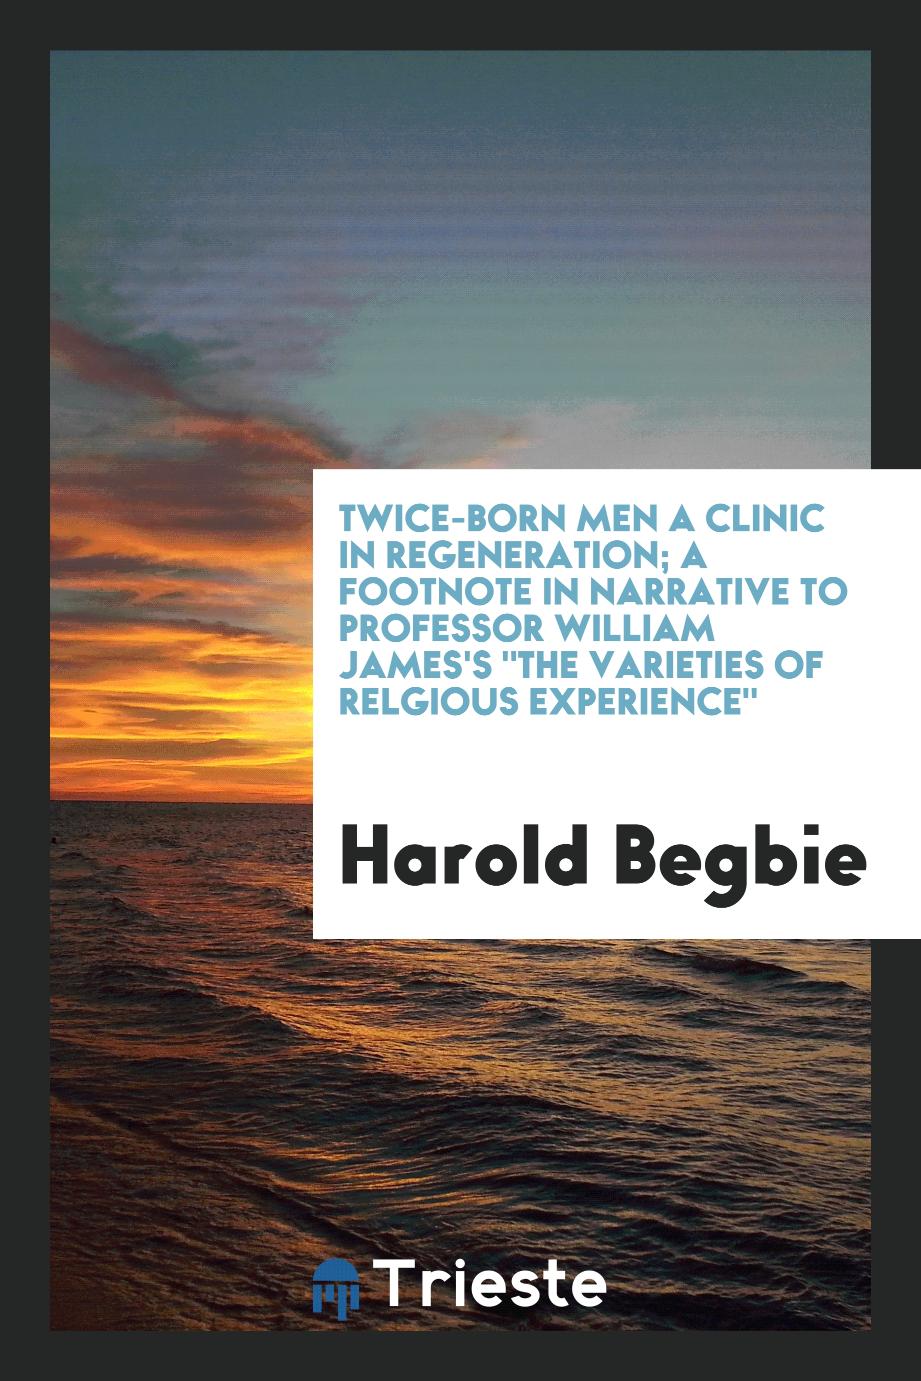 Twice-born men a clinic in regeneration; a footnote in narrative to Professor William James's "The varieties of relgious experience"